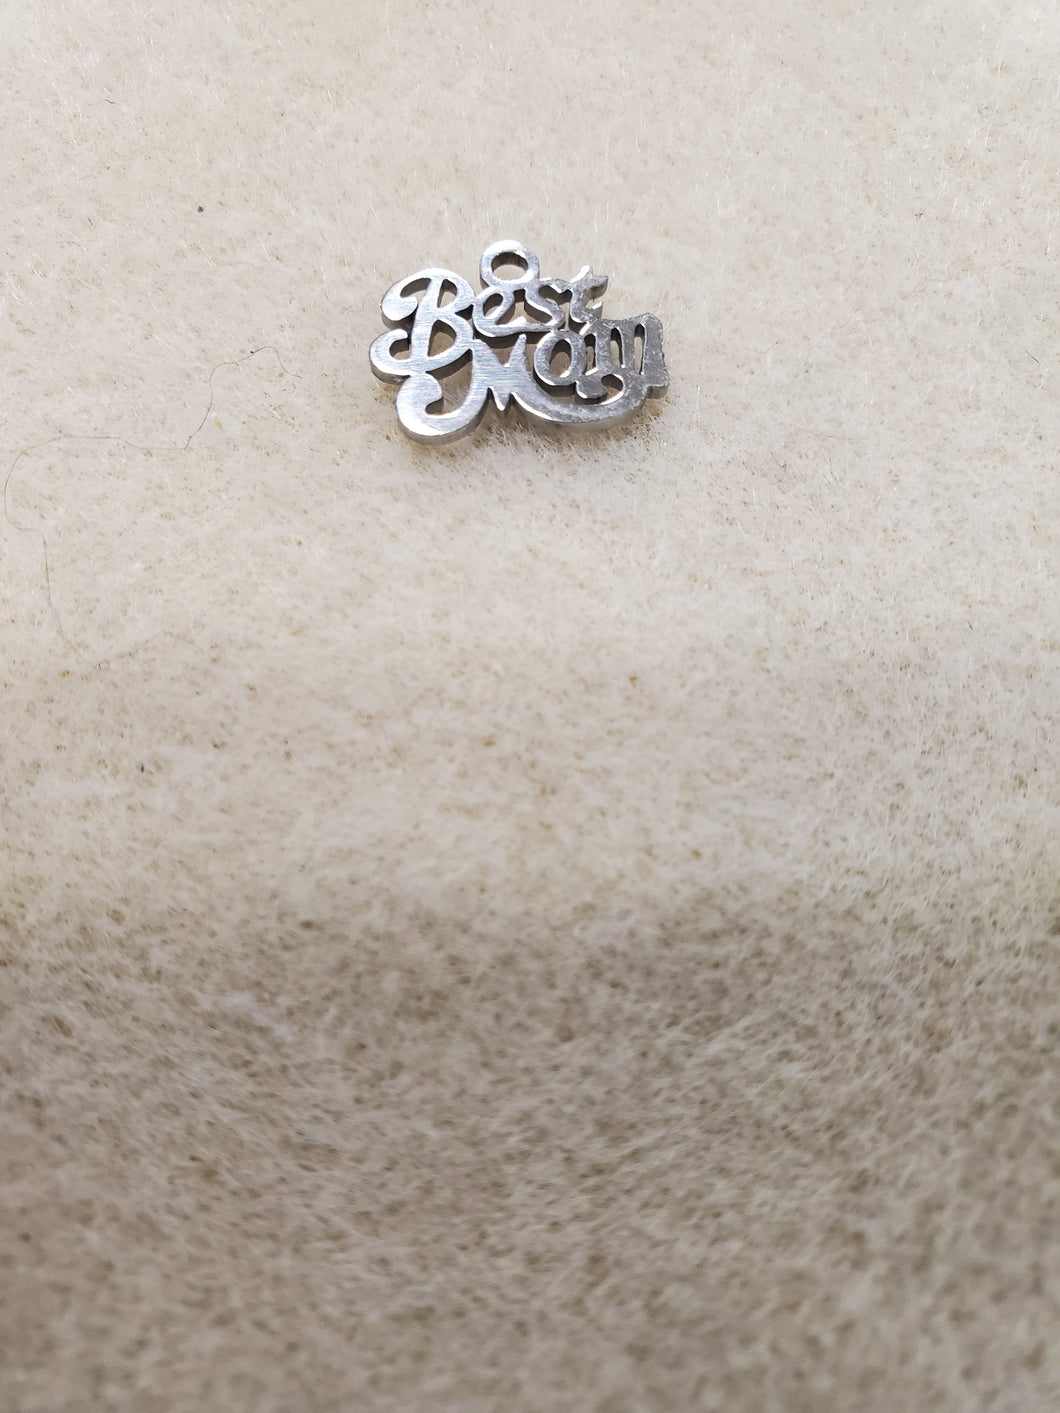 304 Stainless Steel Best Mom Charm